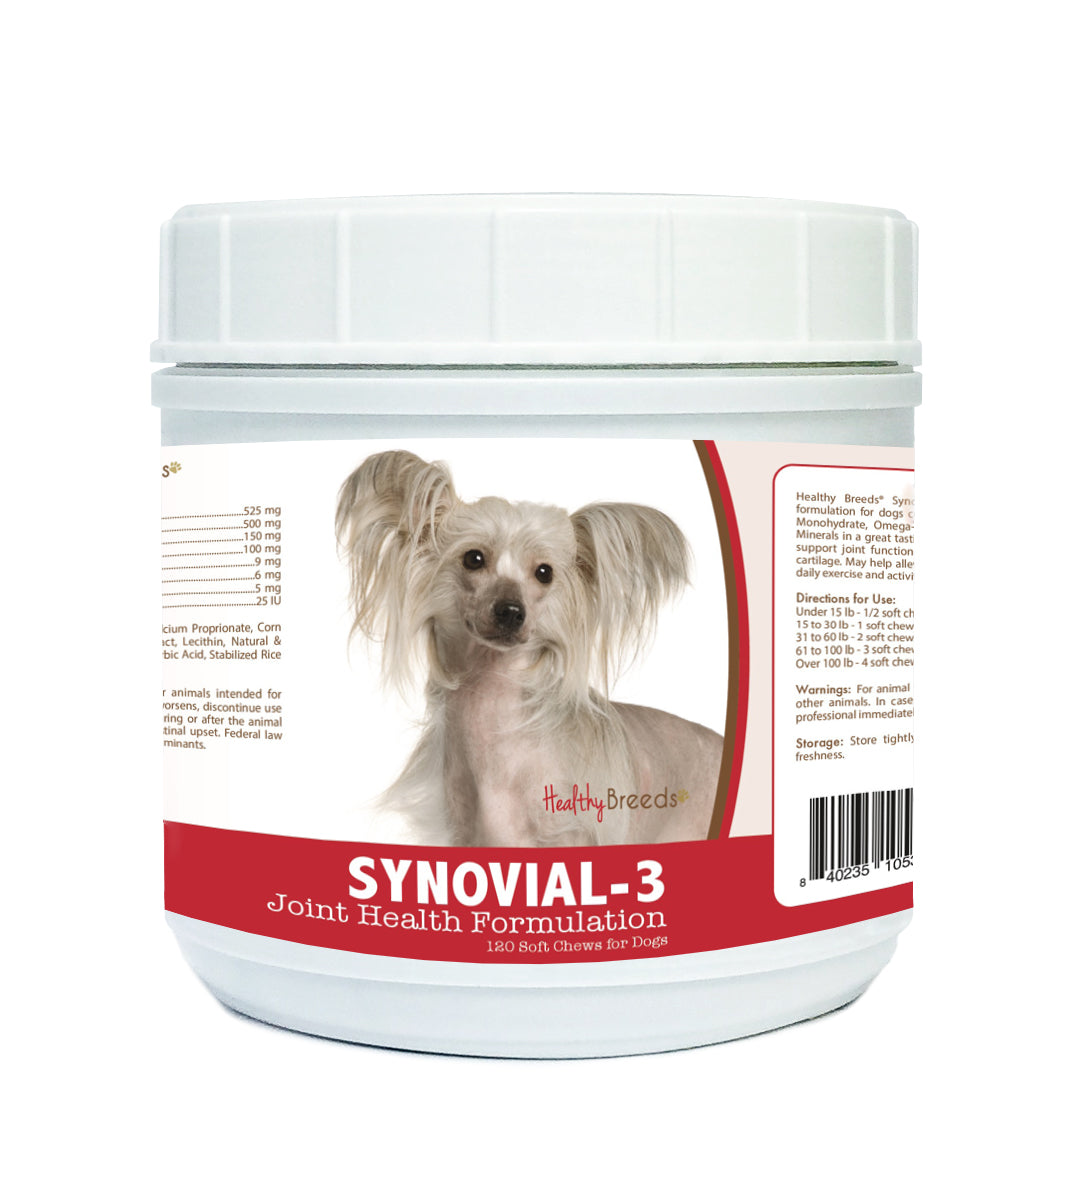 Chinese Crested Synovial-3 Joint Health Formulation Soft Chews 120 Count